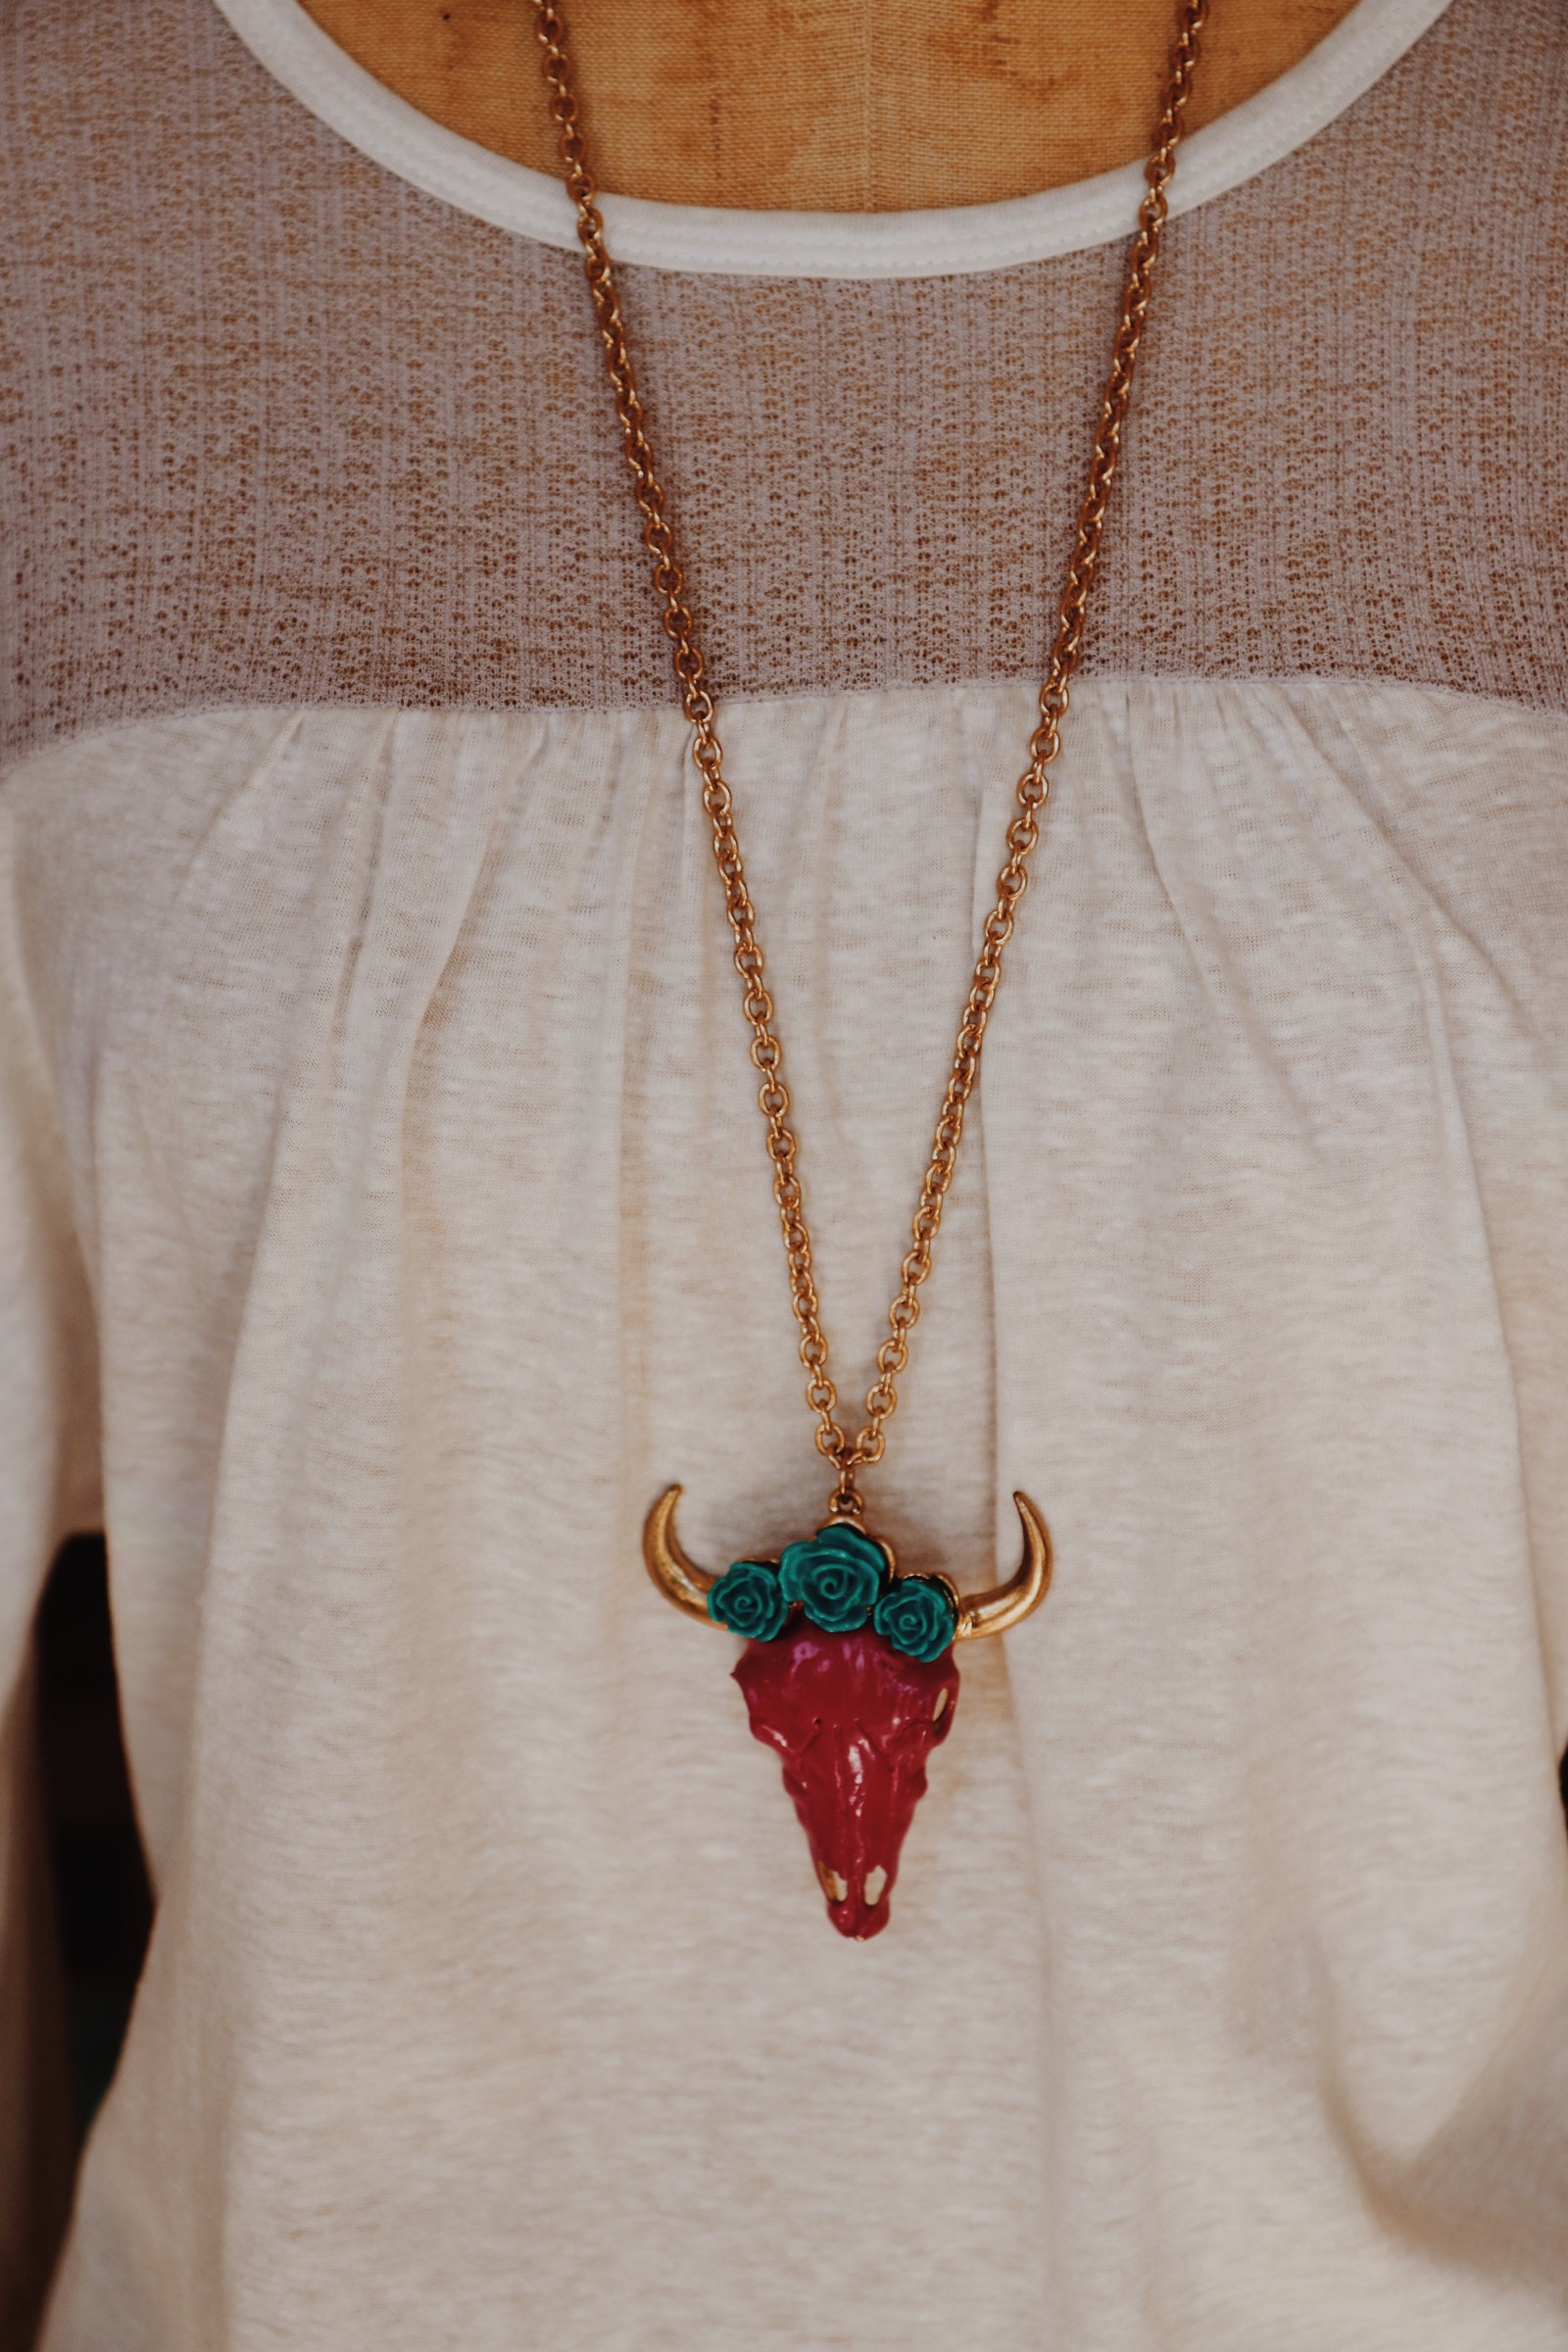 Boho Magenta Pink Cow Skull with turquoise flowers Gold Necklace. This is super cute paired with the magenta pink Beaded necklace. Sold seperately.